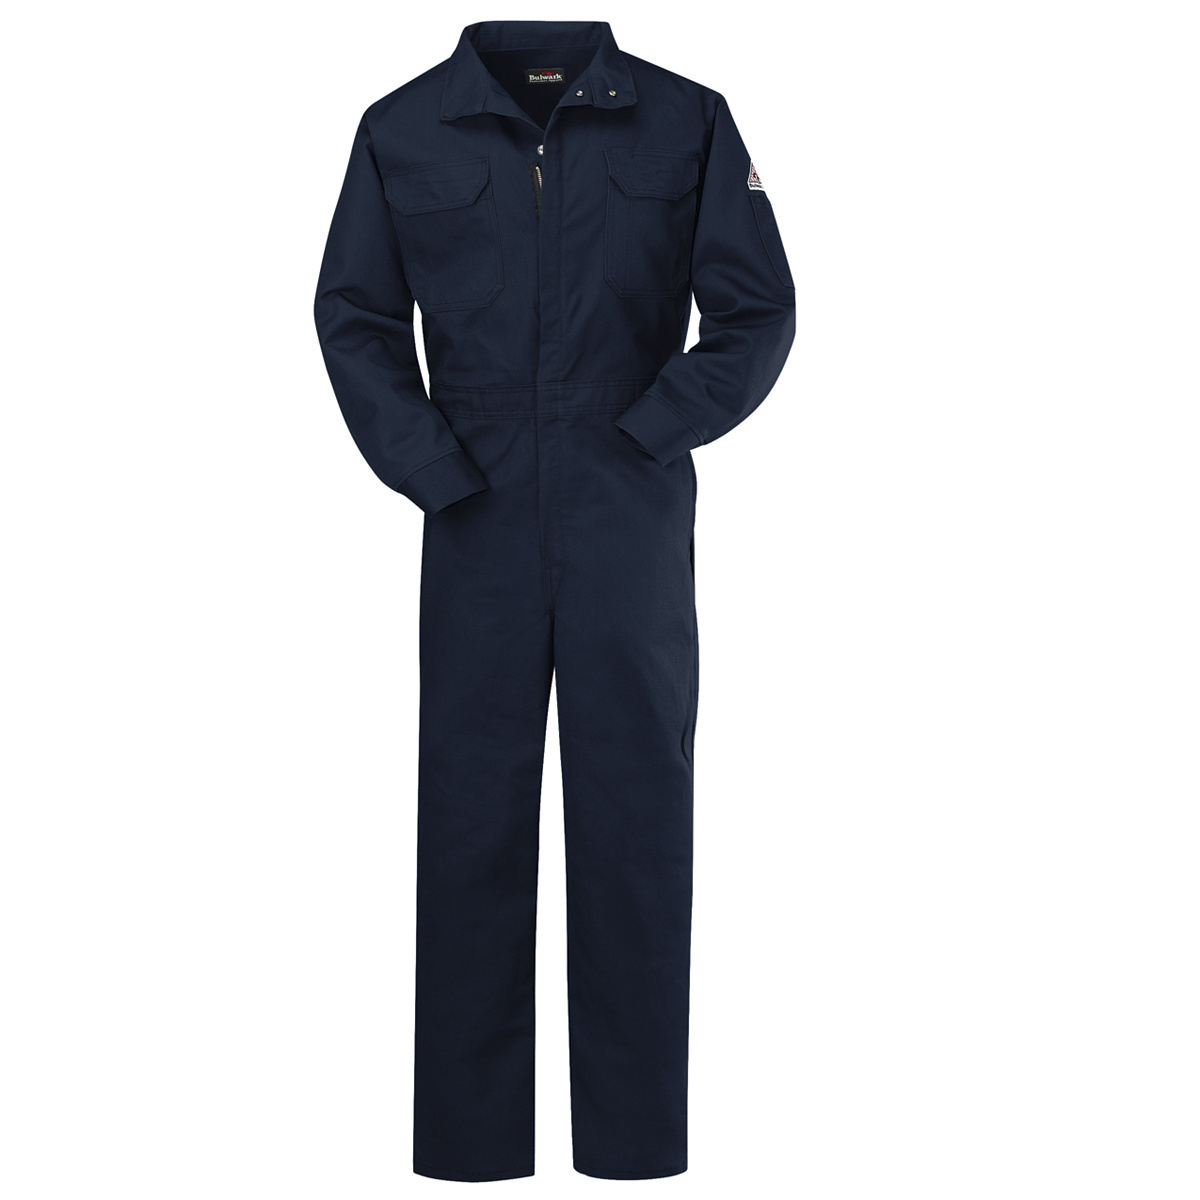 Bulwark® 46 Regular Navy Blue Westex Ultrasoft®/Cotton/Nylon Flame Resistant Coveralls With Zipper Front Closure